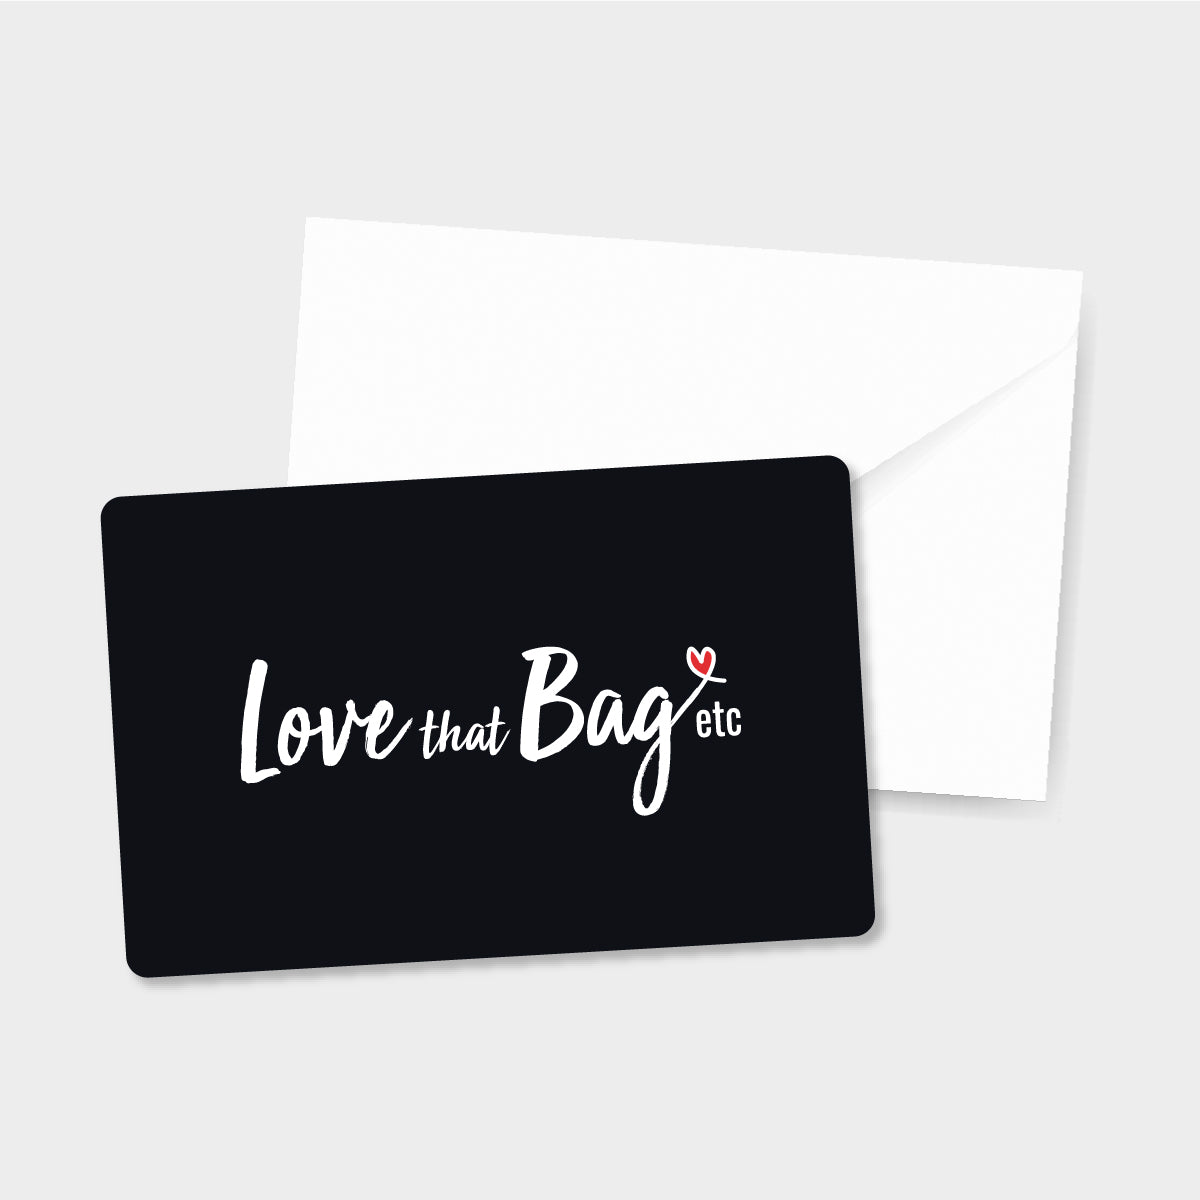 Gift card - Love that Bag etc - Preowned Authentic Designer Handbags & Preloved Fashions